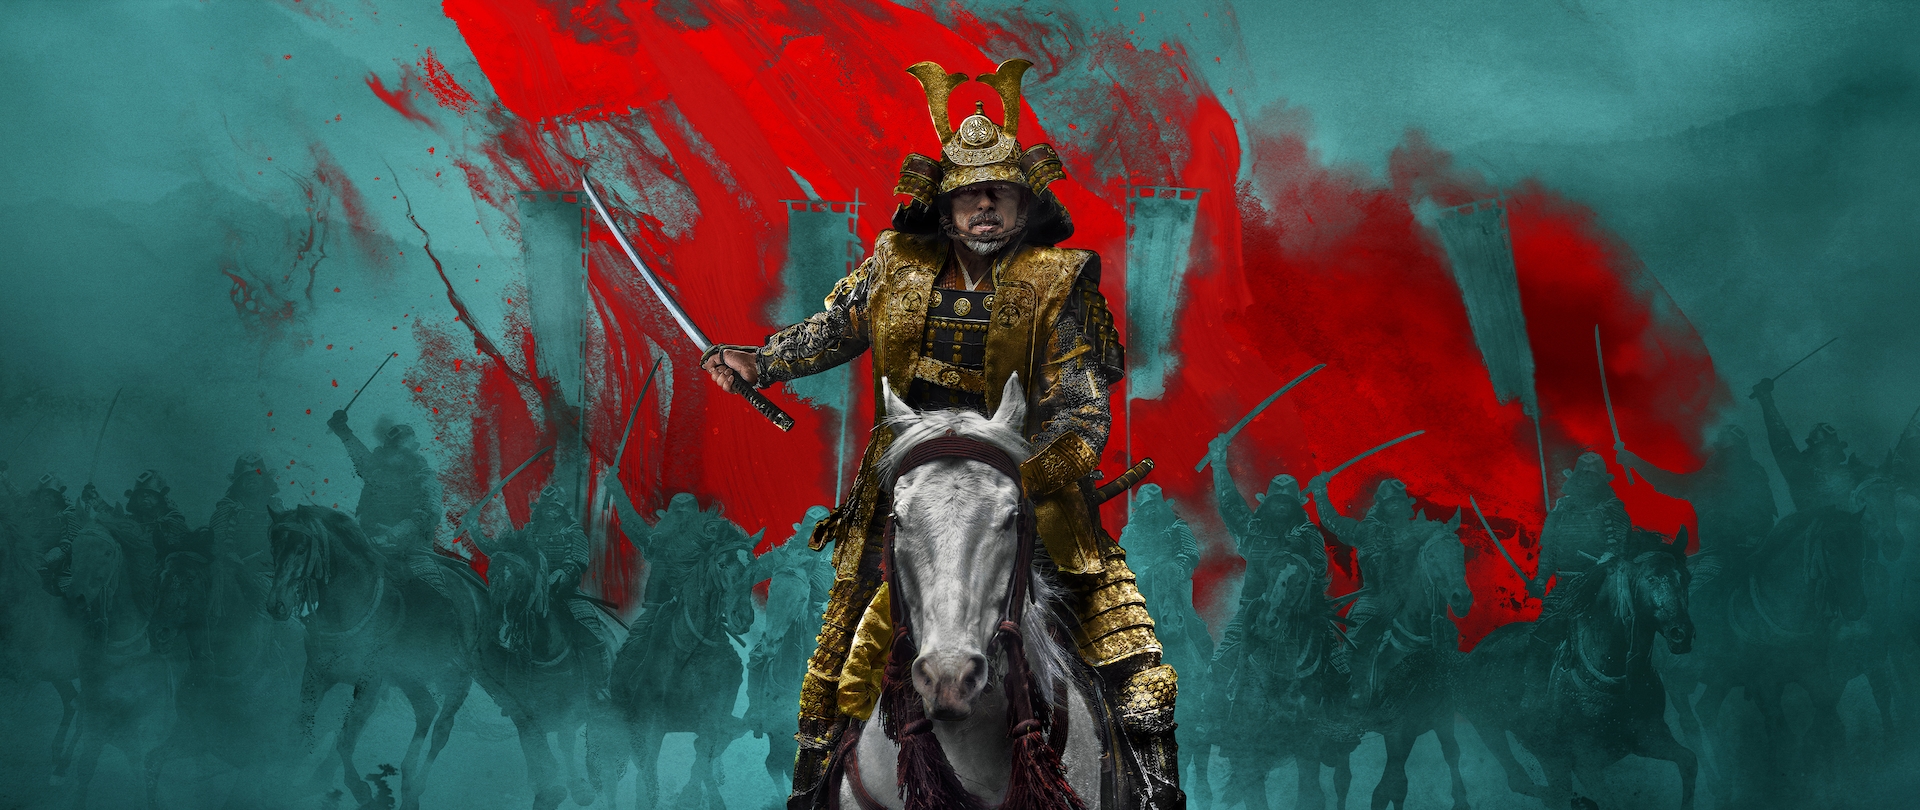 Lord Toranaga dressed in gold ō-yoroi armor riding a white horse with teal-colored silhouetted army and red sky background